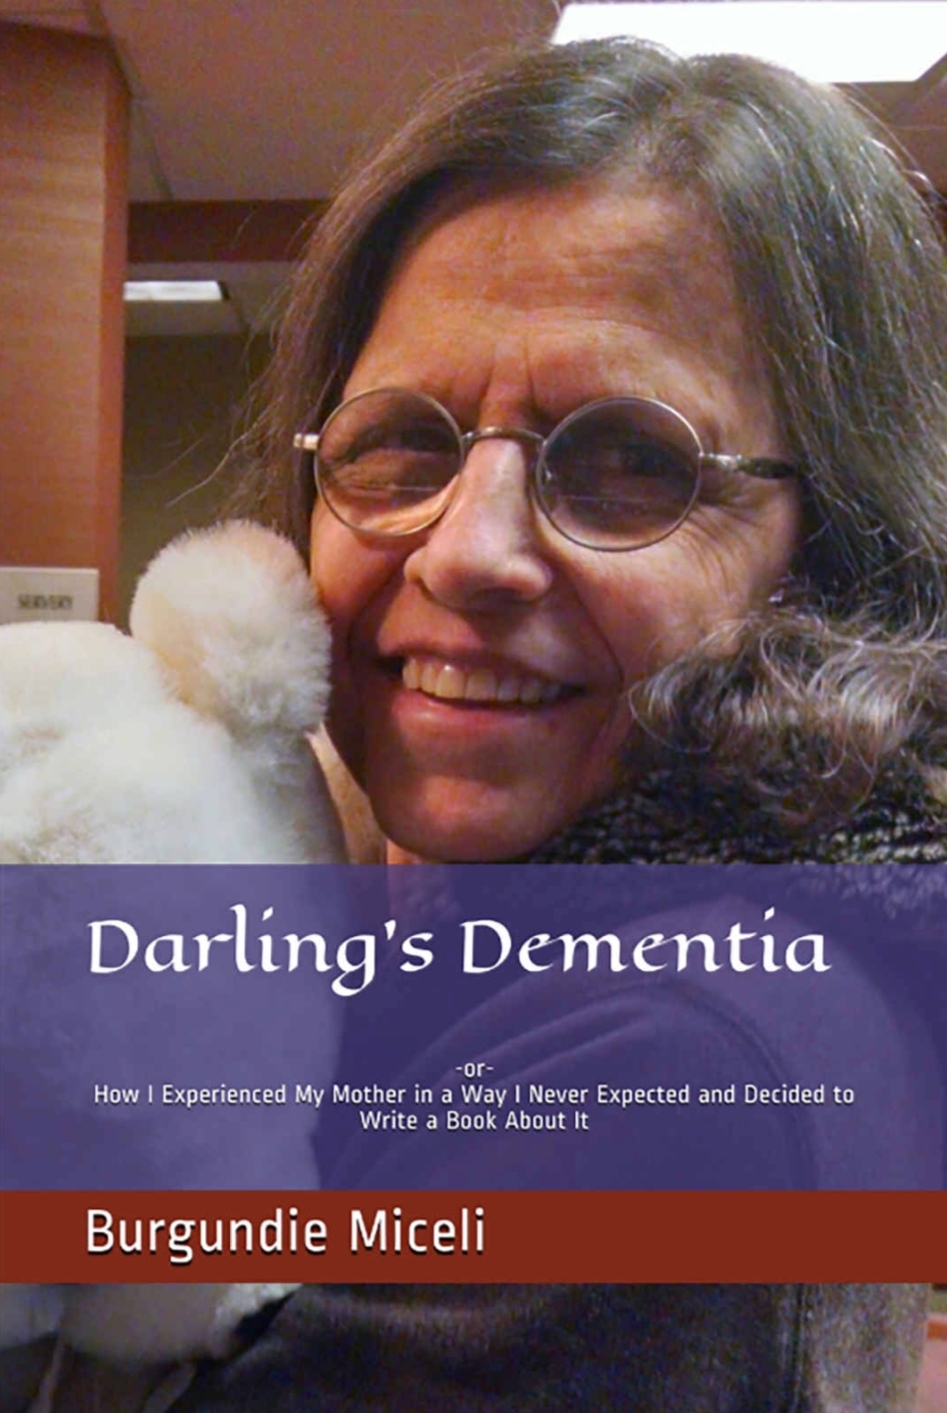 Darling’s Dementia: -or- How I Experienced My Mother in a Way I Never Expected and Decided to Write a Book About It  .  .  .